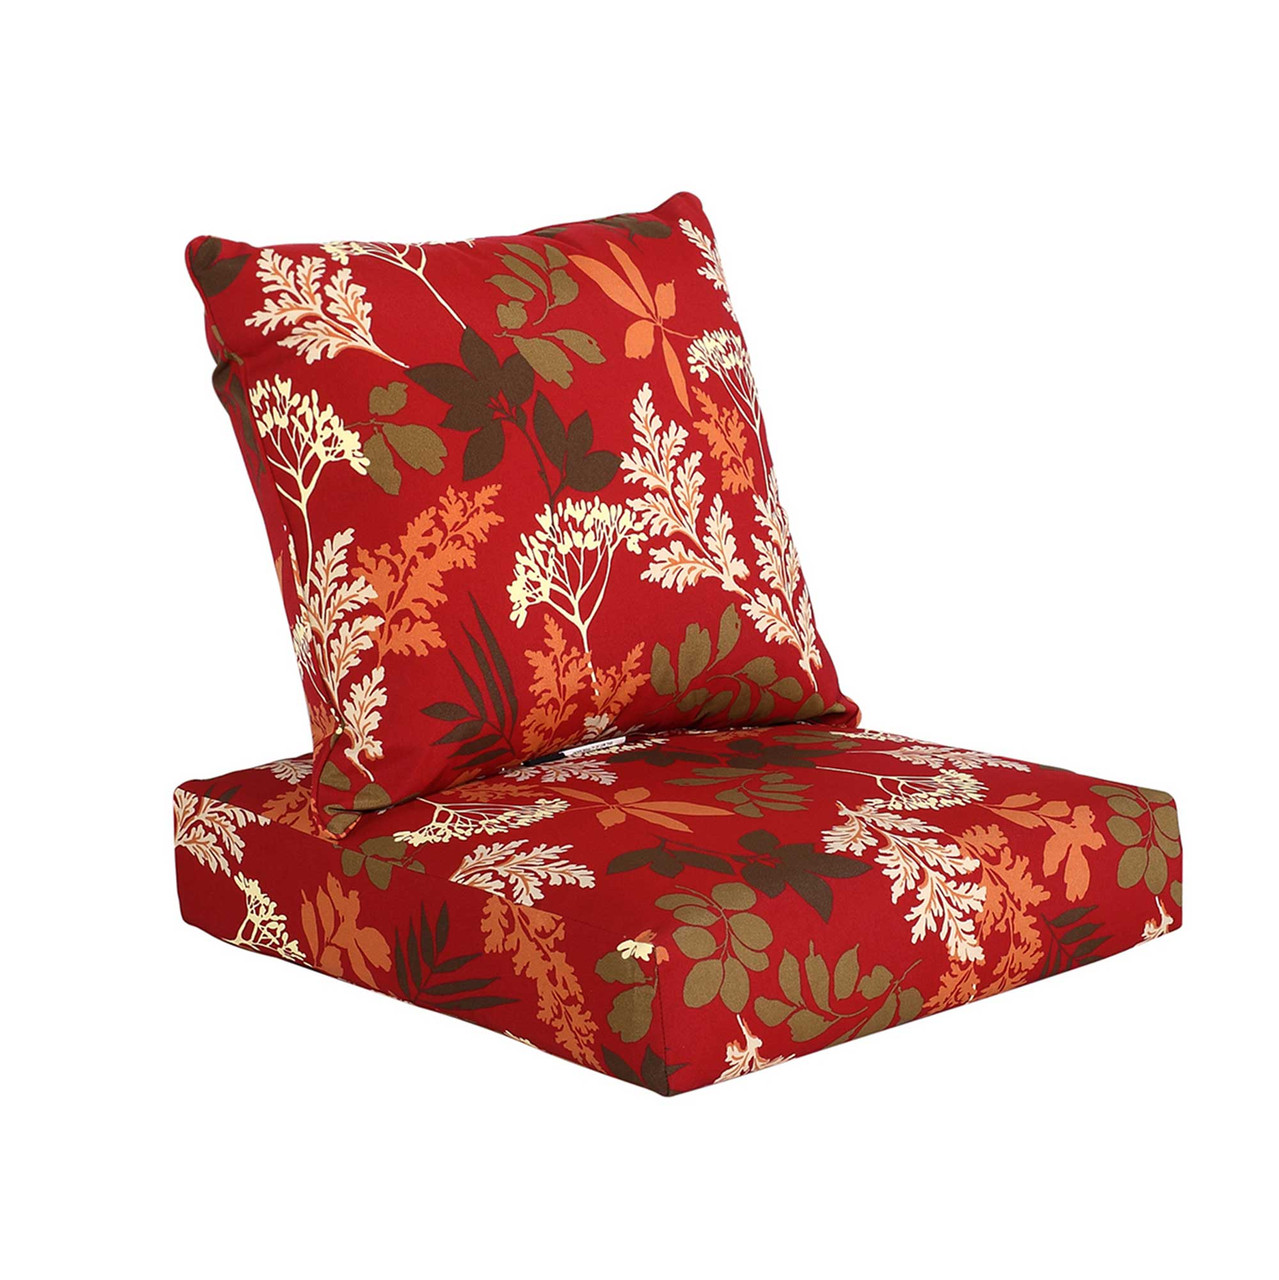 https://cdn11.bigcommerce.com/s-9szyhrzy14/images/stencil/1280x1280/products/156/501/Bossima_Outdoor_Deep_Seat_Cushions_Red_Floral__59042.1629645663.jpg?c=1